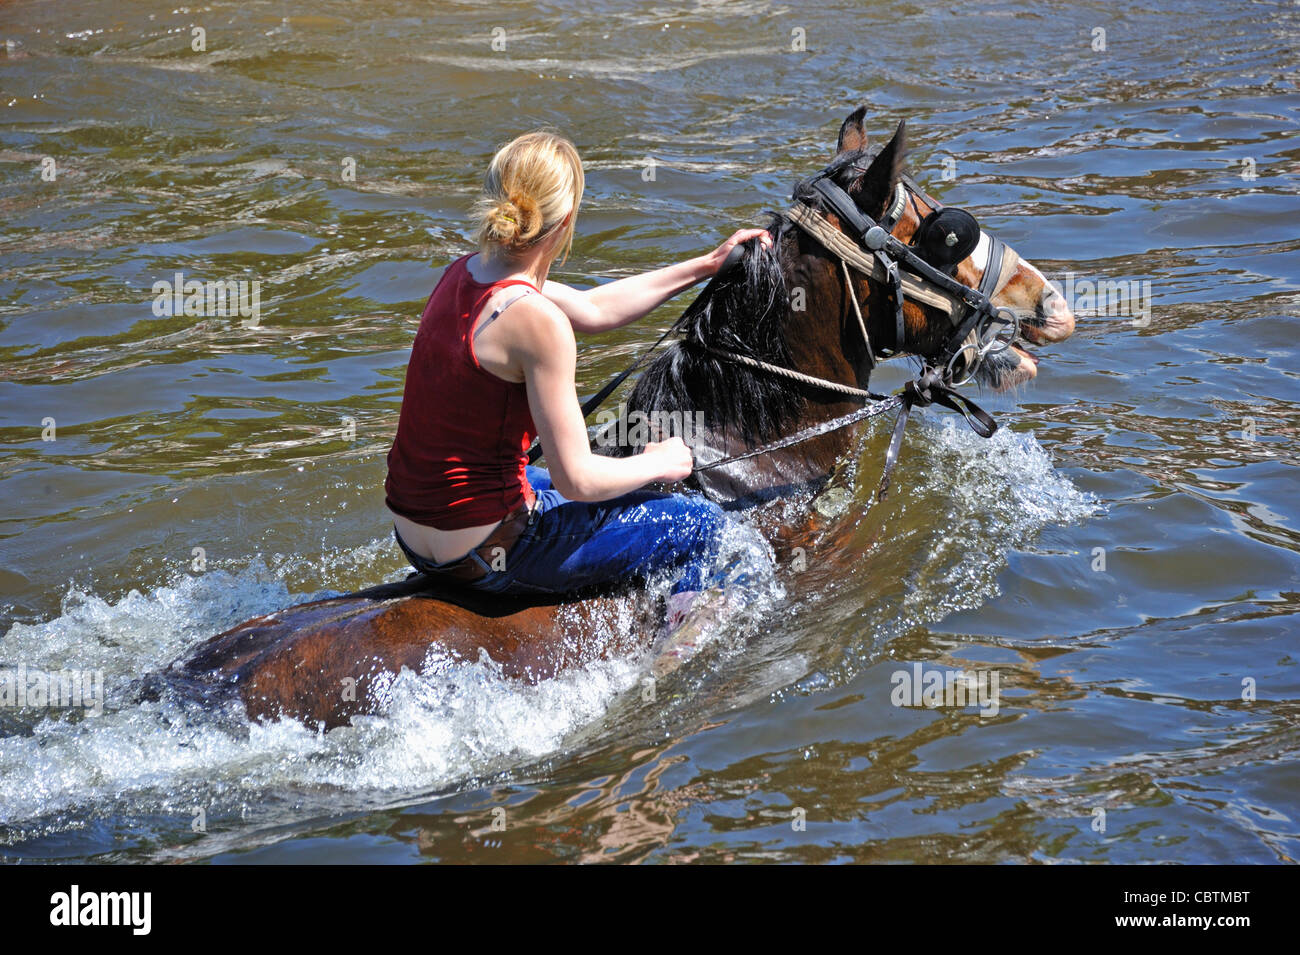 Gypsy traveller girl riding horse in River Eden. Appleby Horse Fair. Appleby-in-Westmorland, Cumbria, England, United Kingdom. . Stock Photo